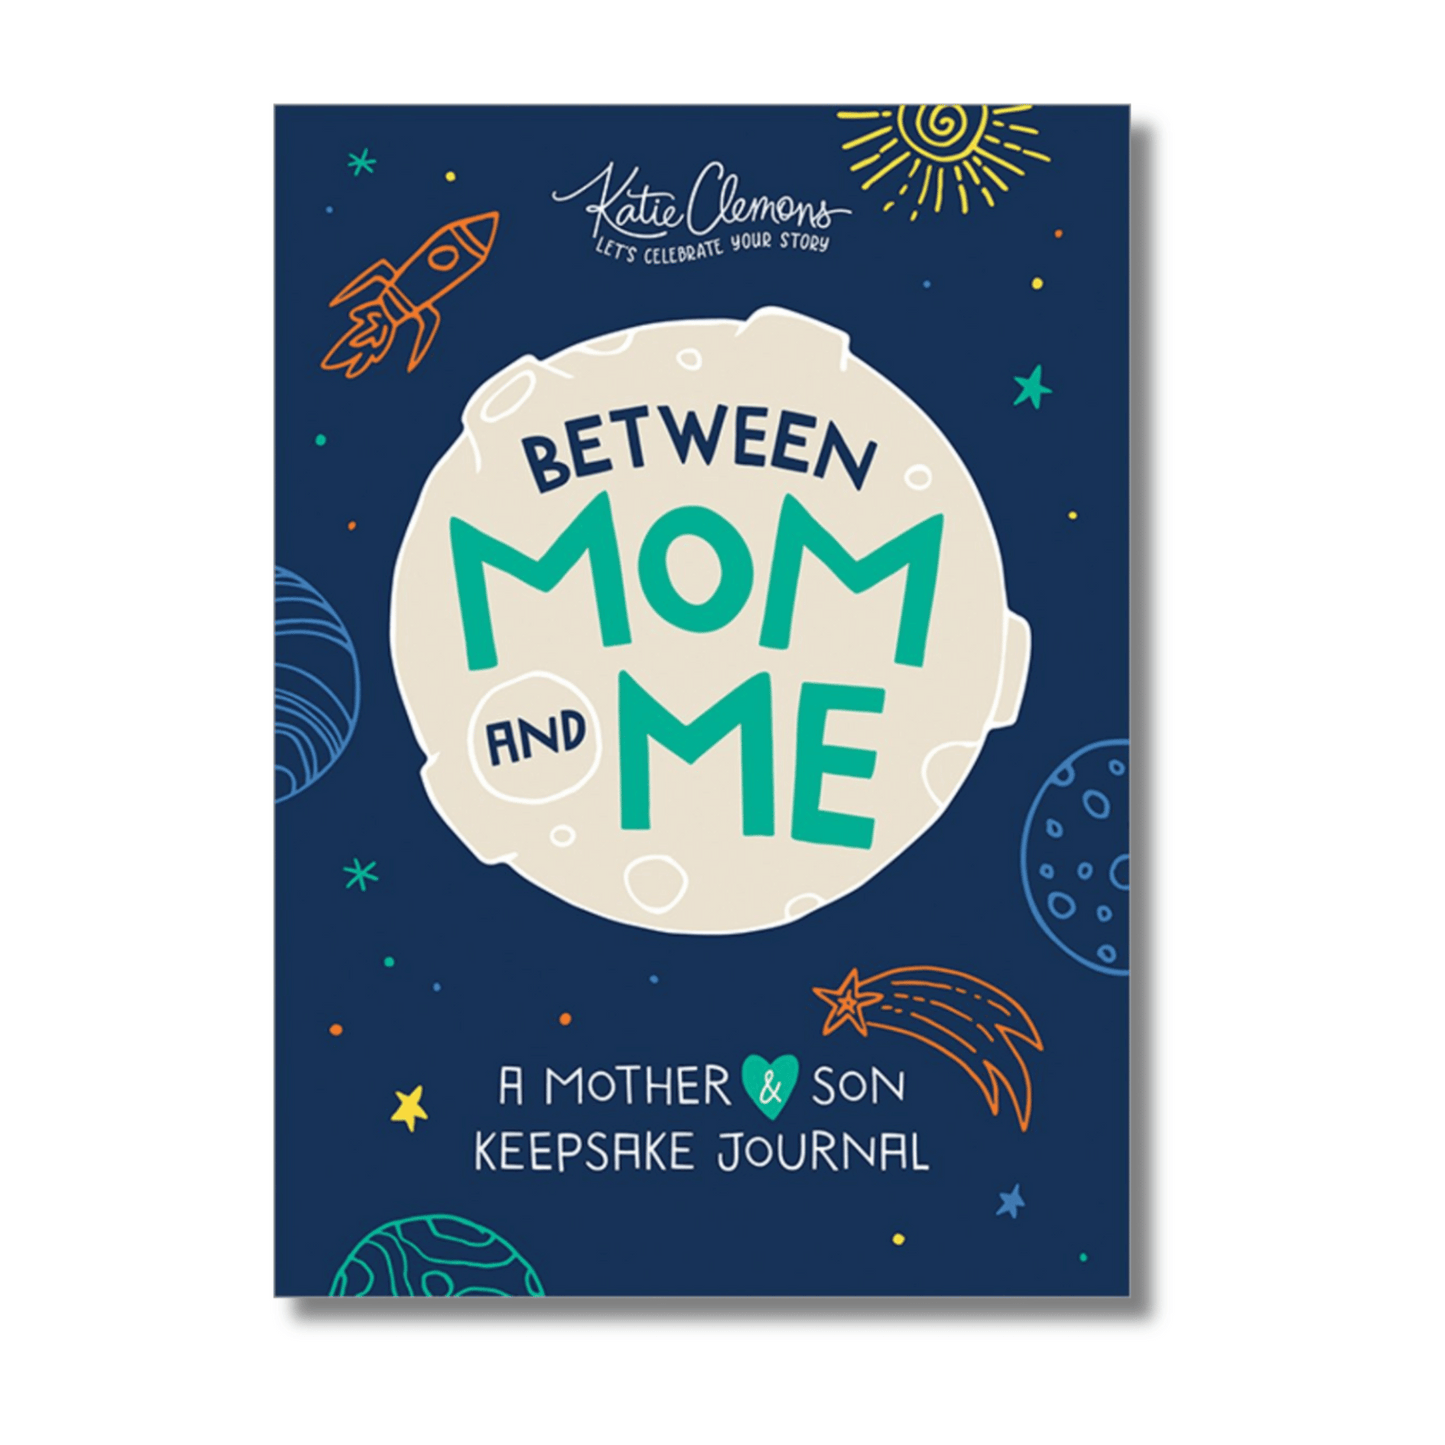 Between Mom and Me - A Mother Son Journal